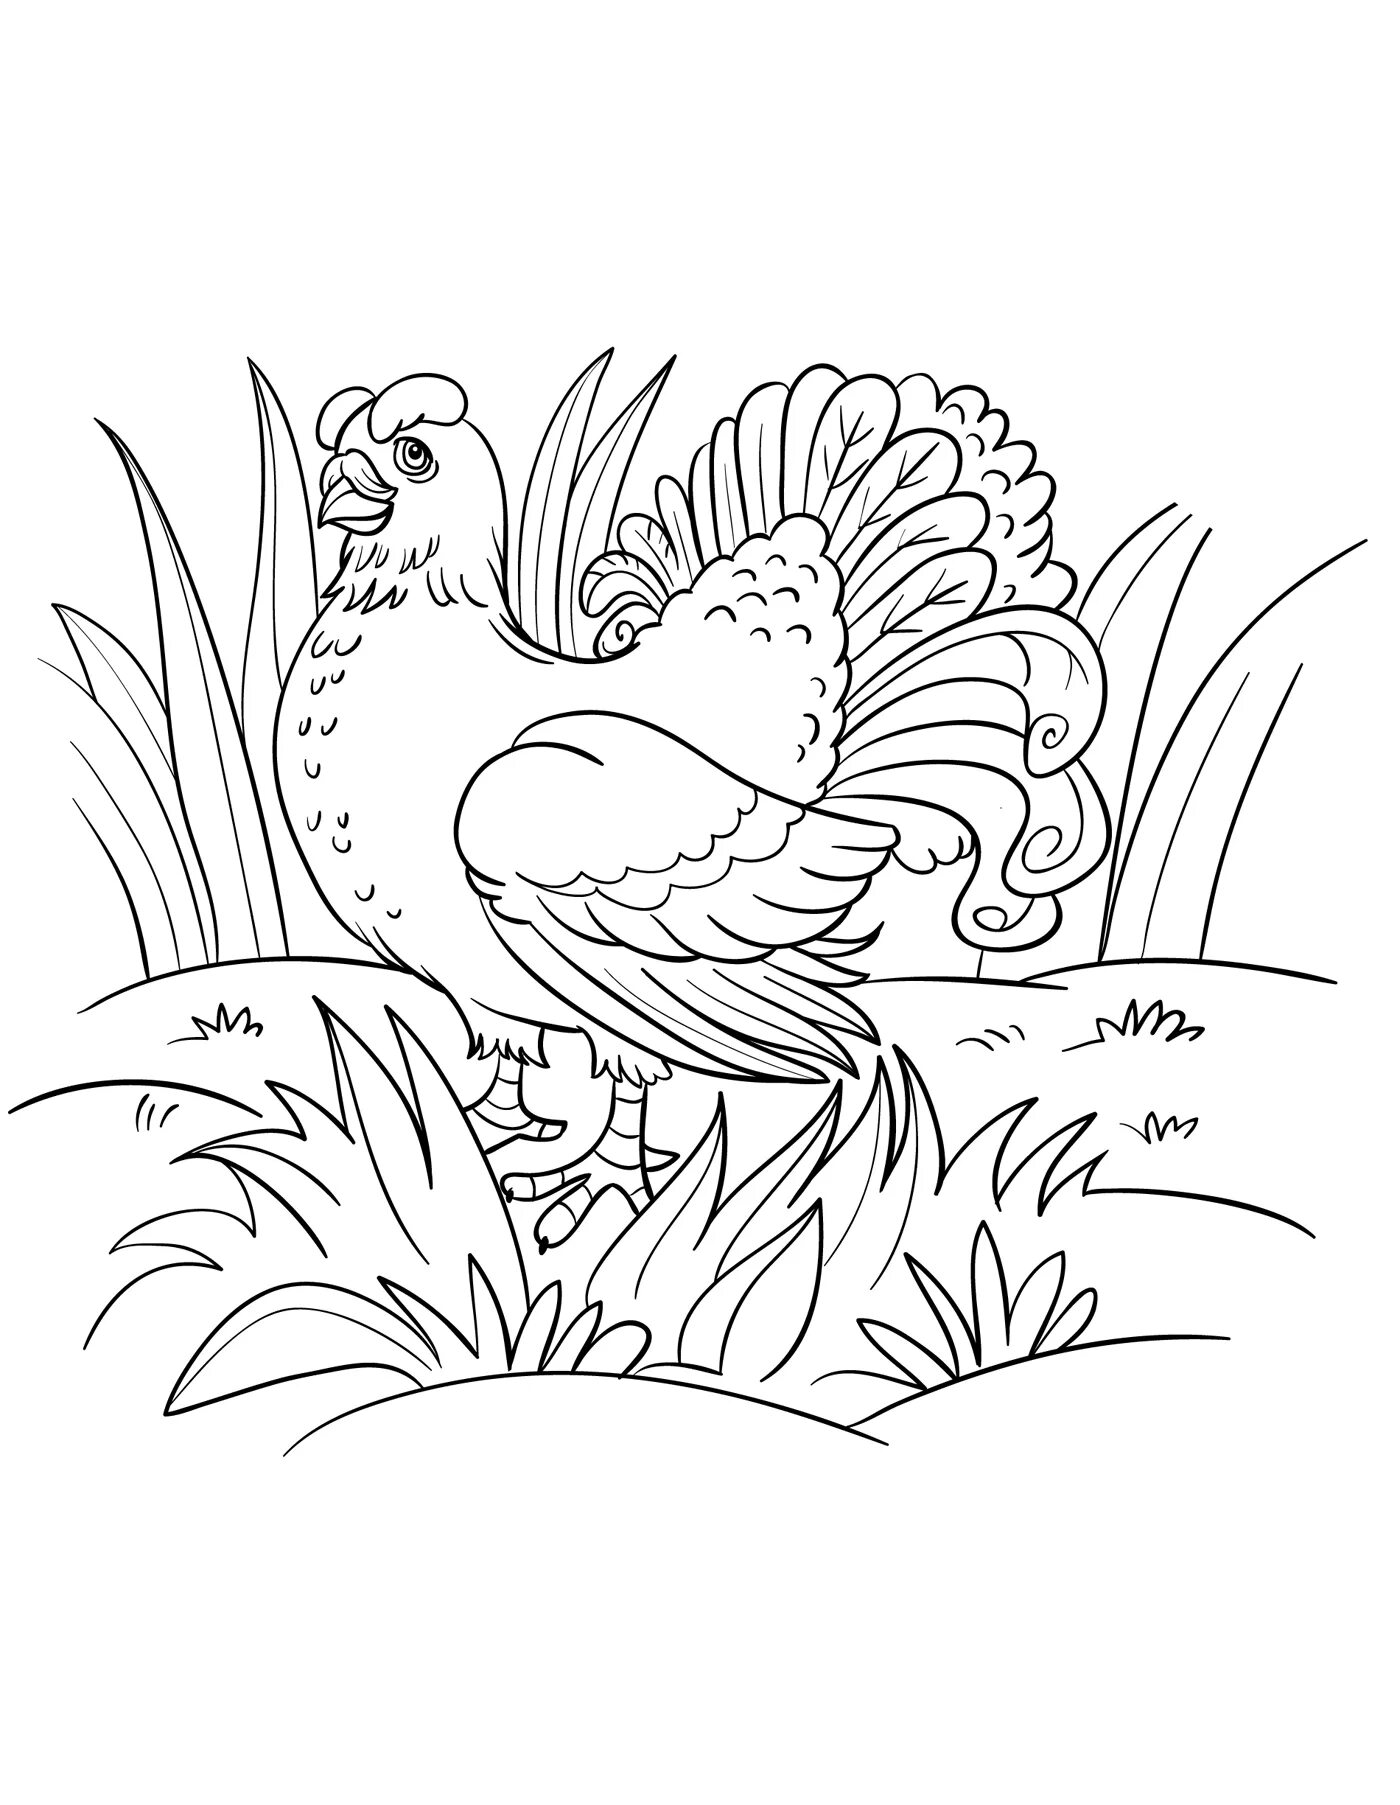 Excellent grouse coloring page for kids